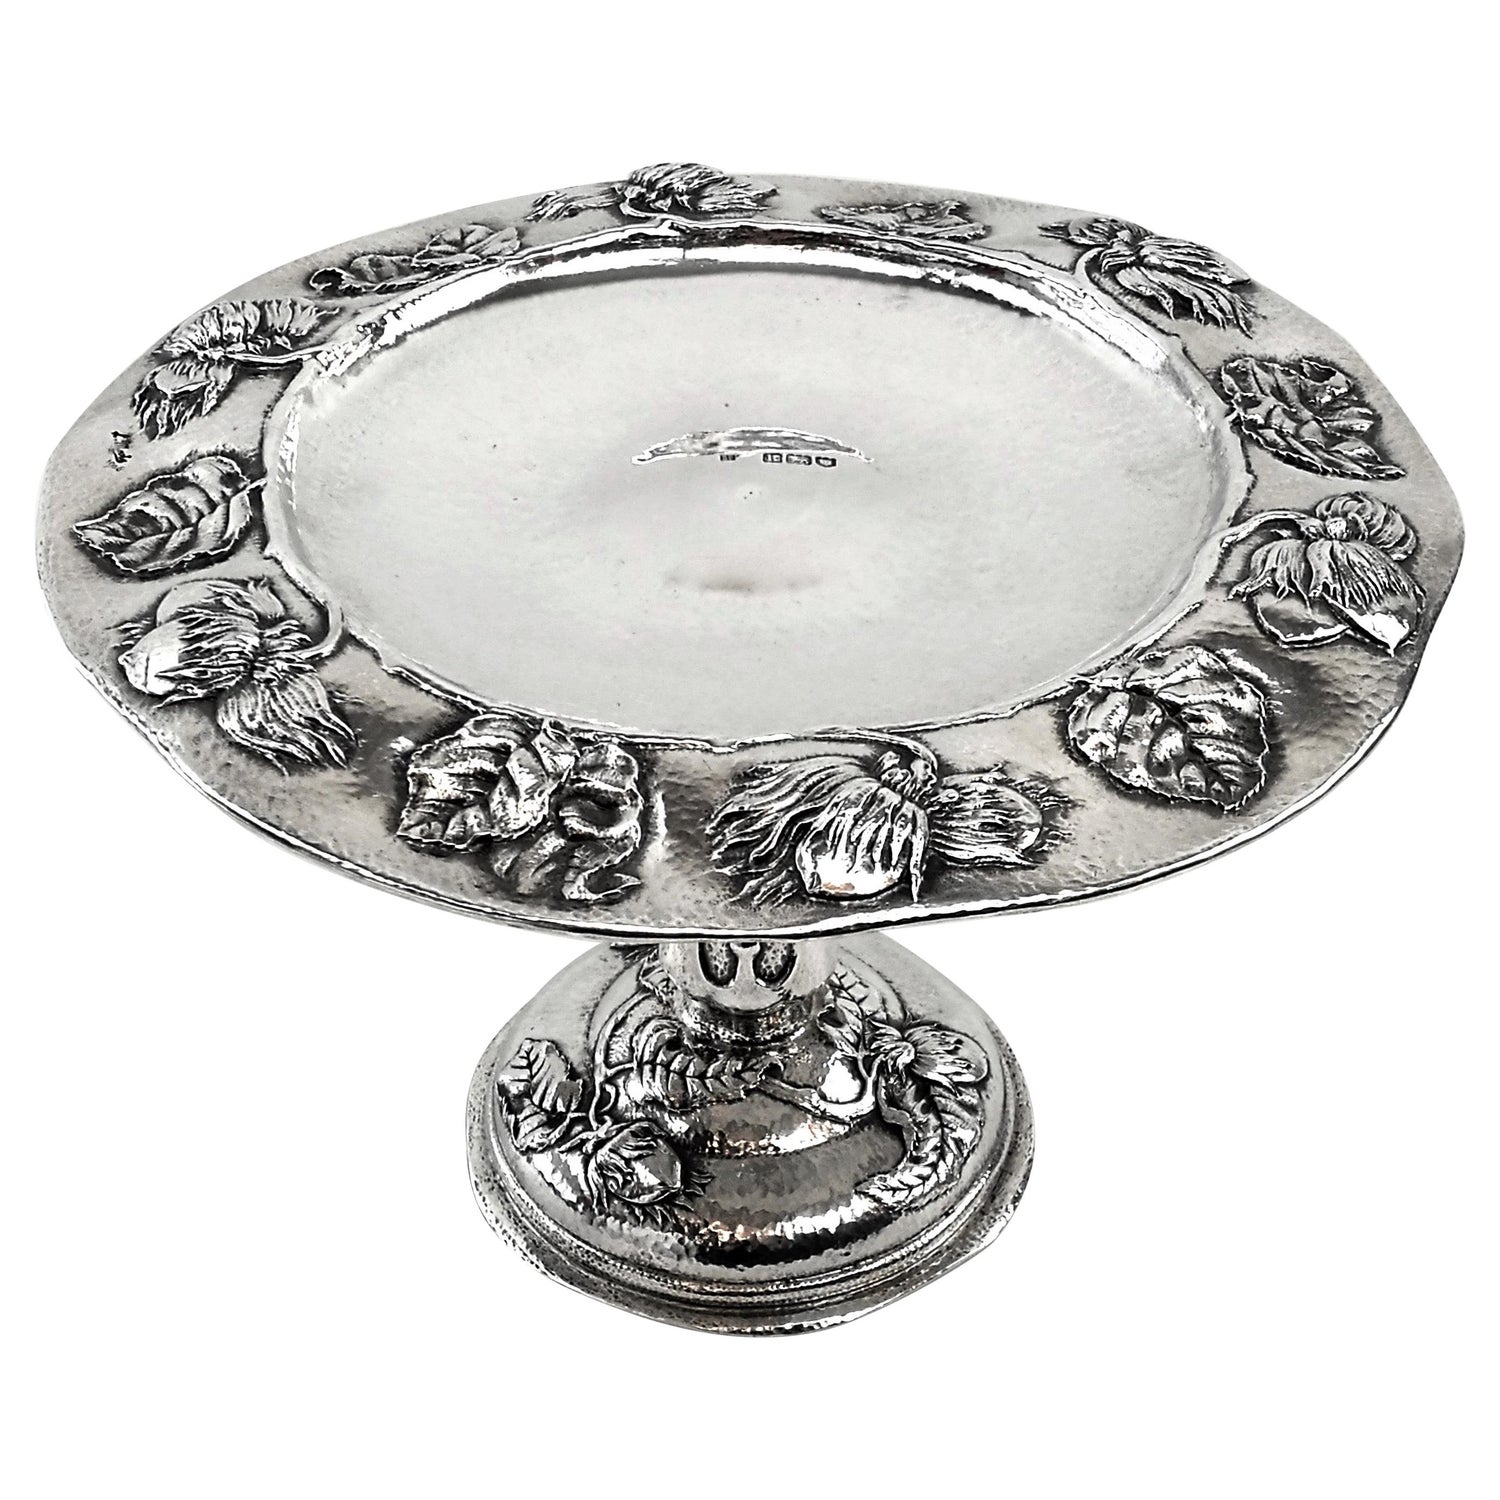 Antique Arts & Crafts Sterling Silver Dish / Tazza / Comport, London, 1905